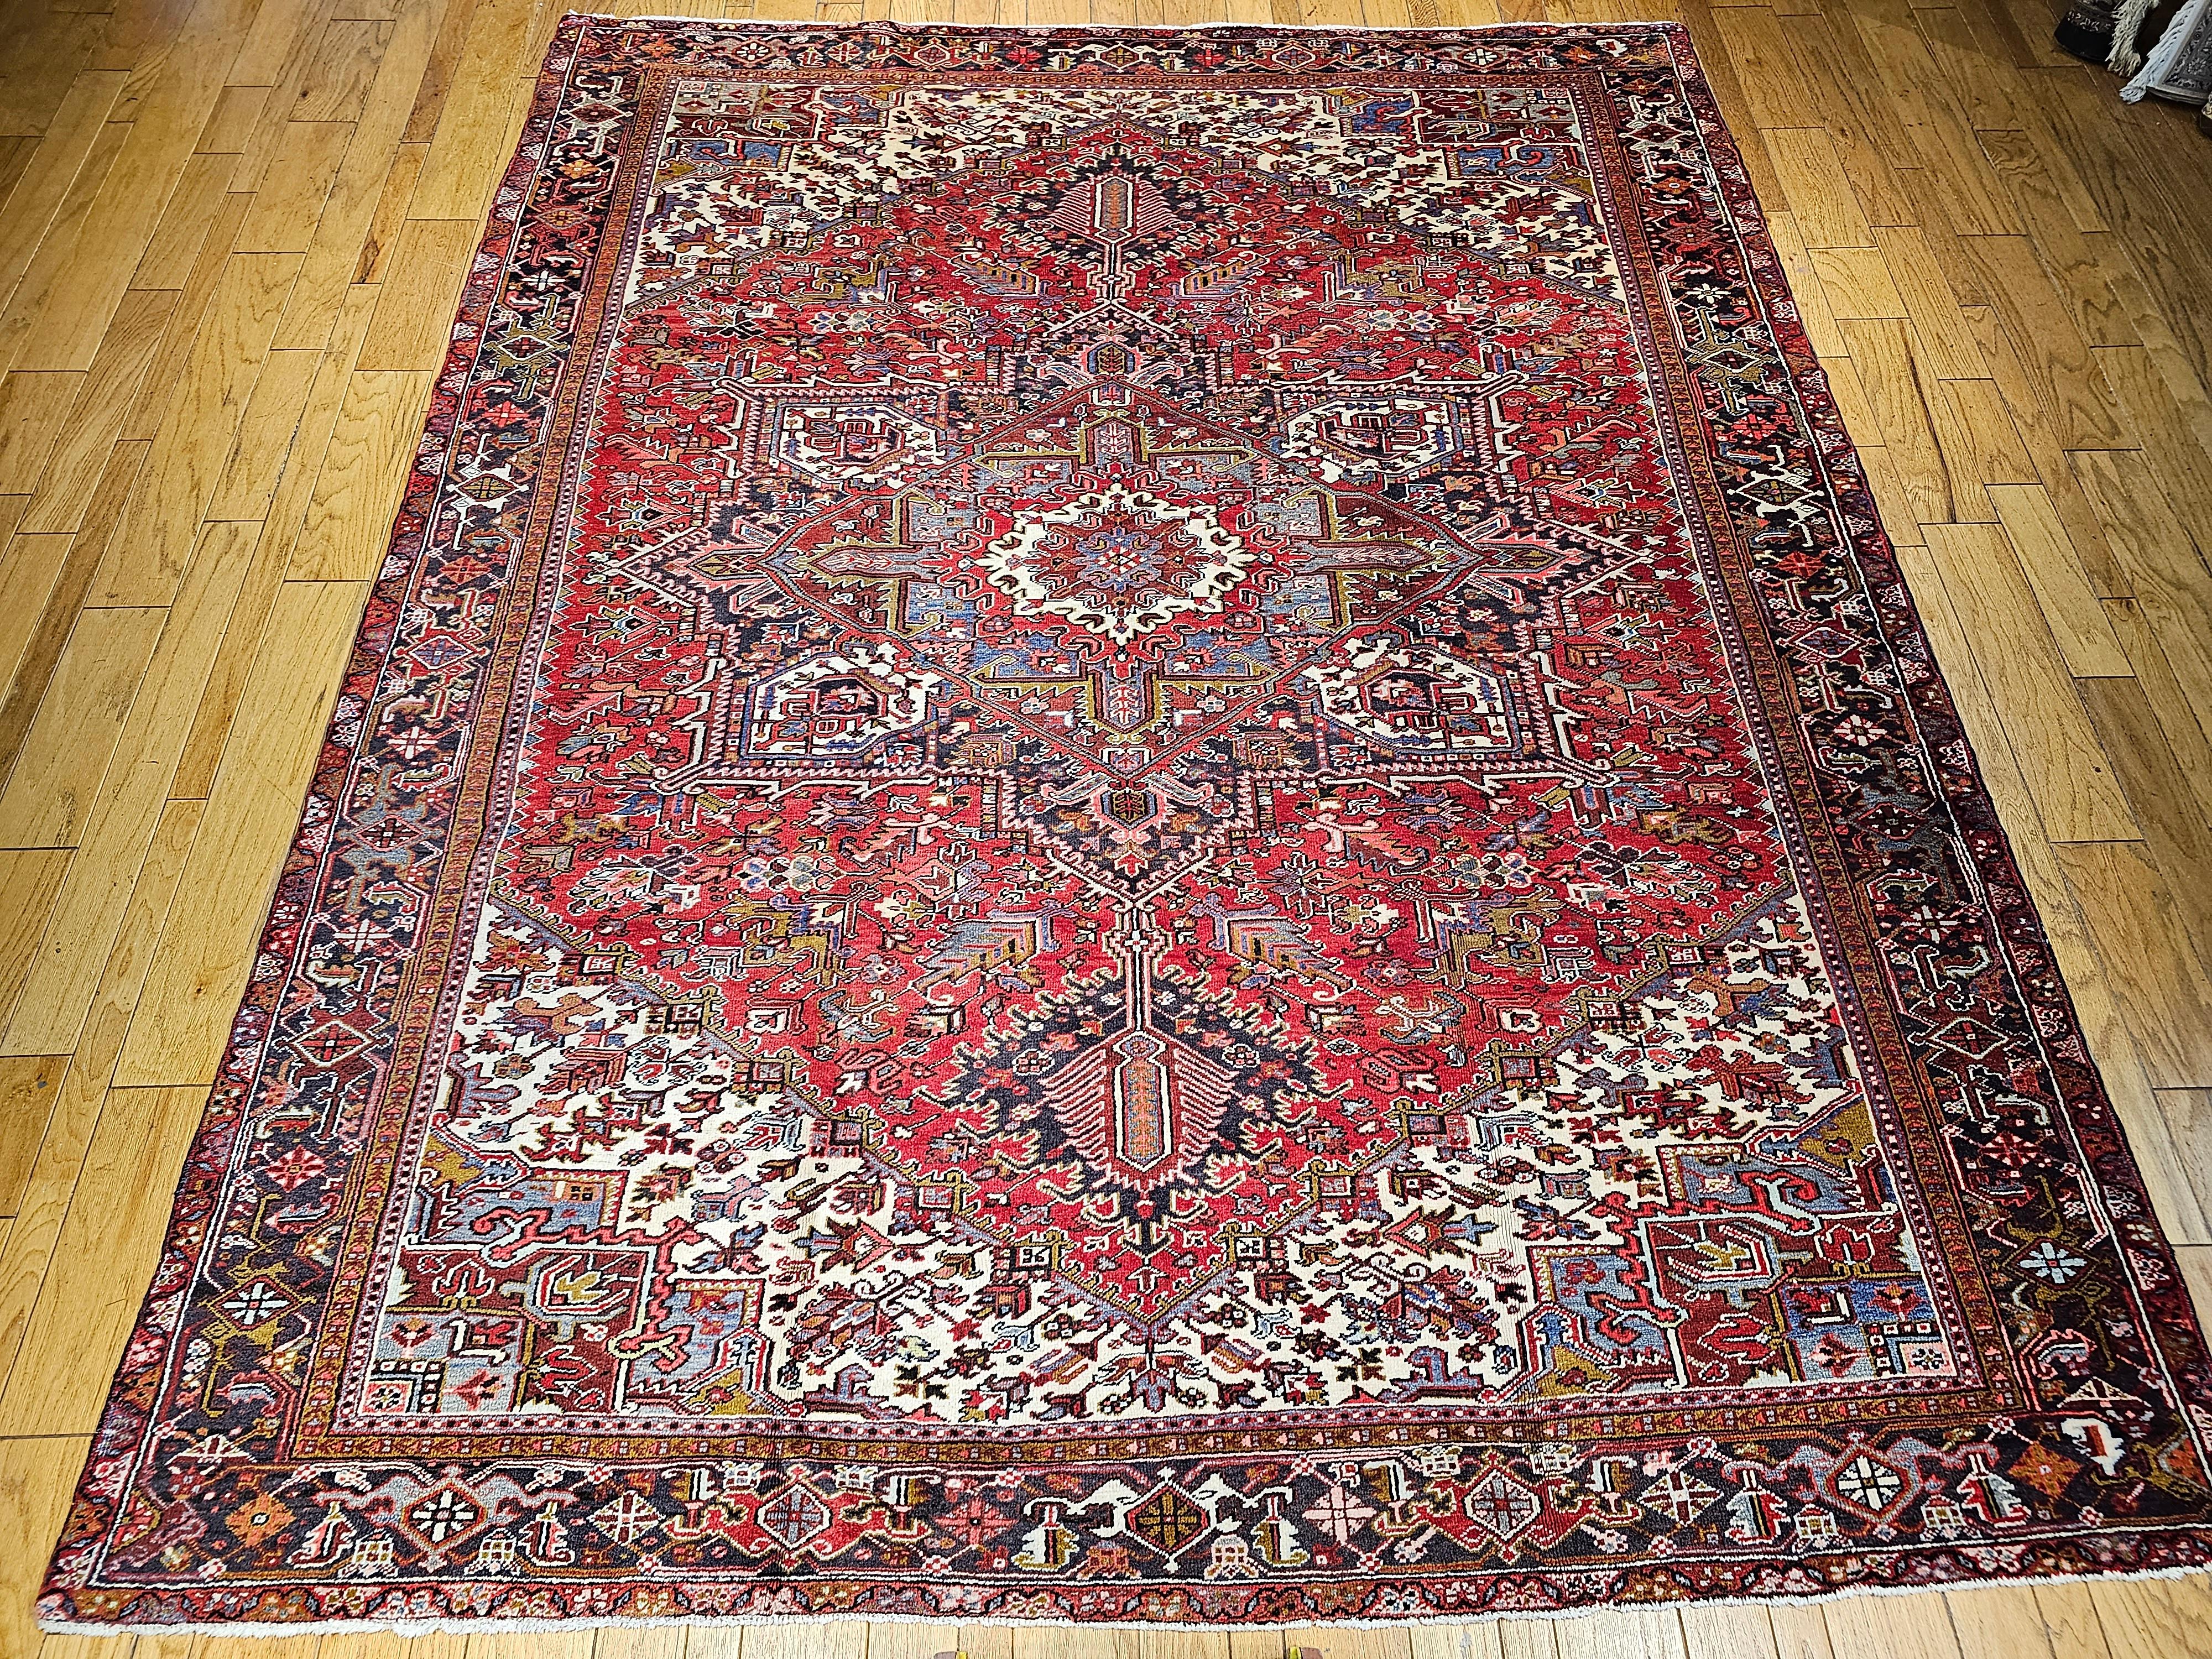 Room-size Persian Heriz in a medallion pattern in ivory, red, pale blue, yellow circa the mid 1900s.  The Heriz rug has a red field with a dark blue or lavender and ivory color spandrels.  The border is in a navy blue color.  The weave is very tight